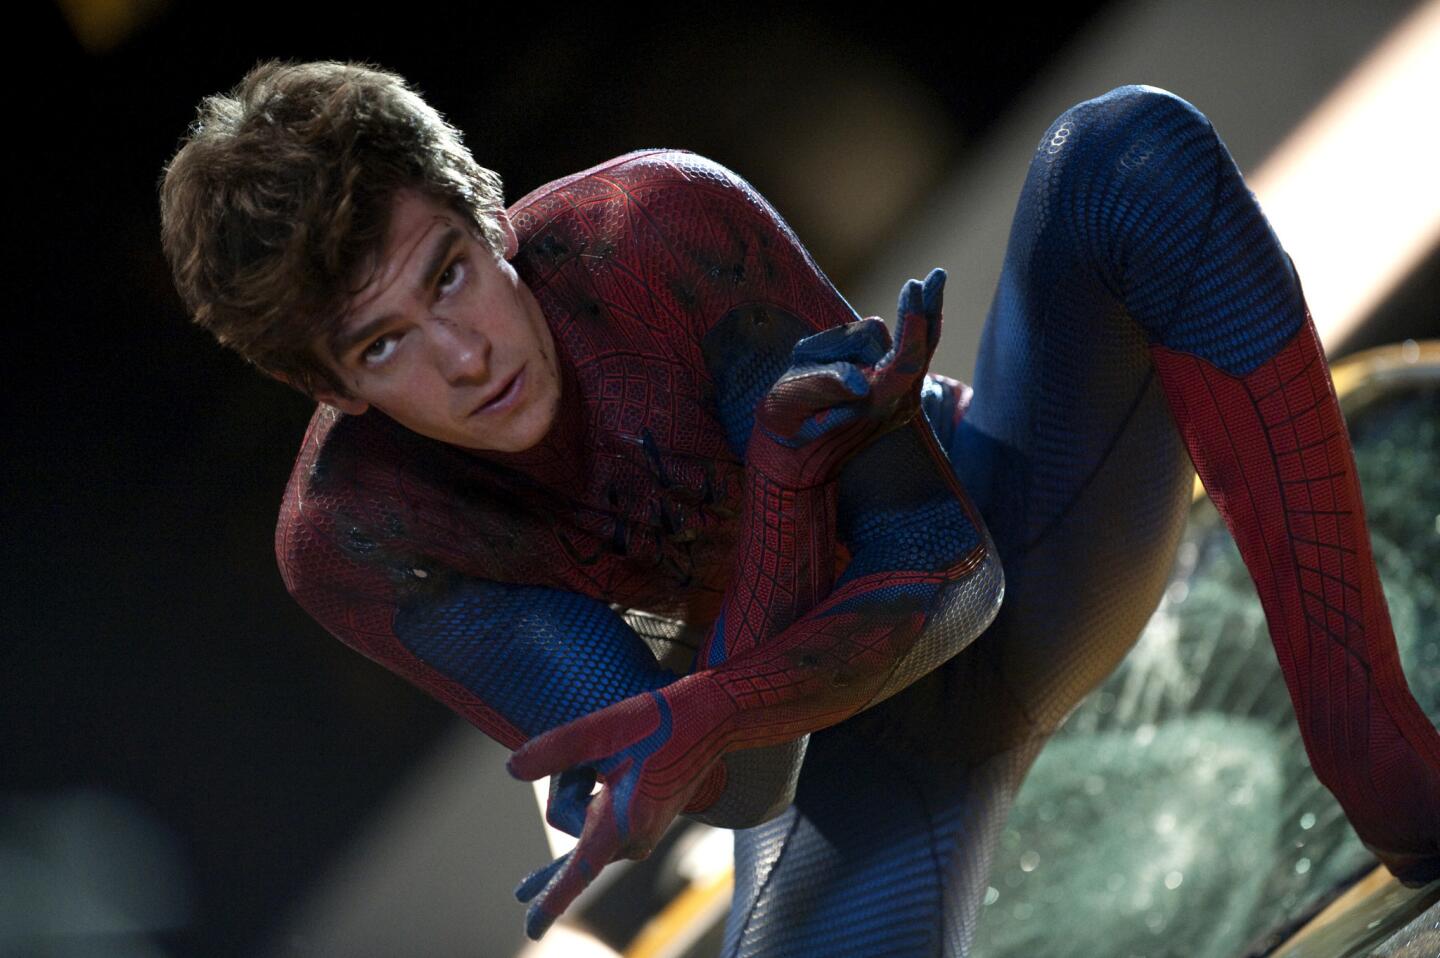 "The Amazing Spider-Man," Sony's reboot of the Spiderman series, grossed $35 million in just one day.MORE: "Amazing Spider-Man" collects million during first 24 hours | Review: "The Amazing Spiderman" | Video: "Amazing Spider-Man" premiere